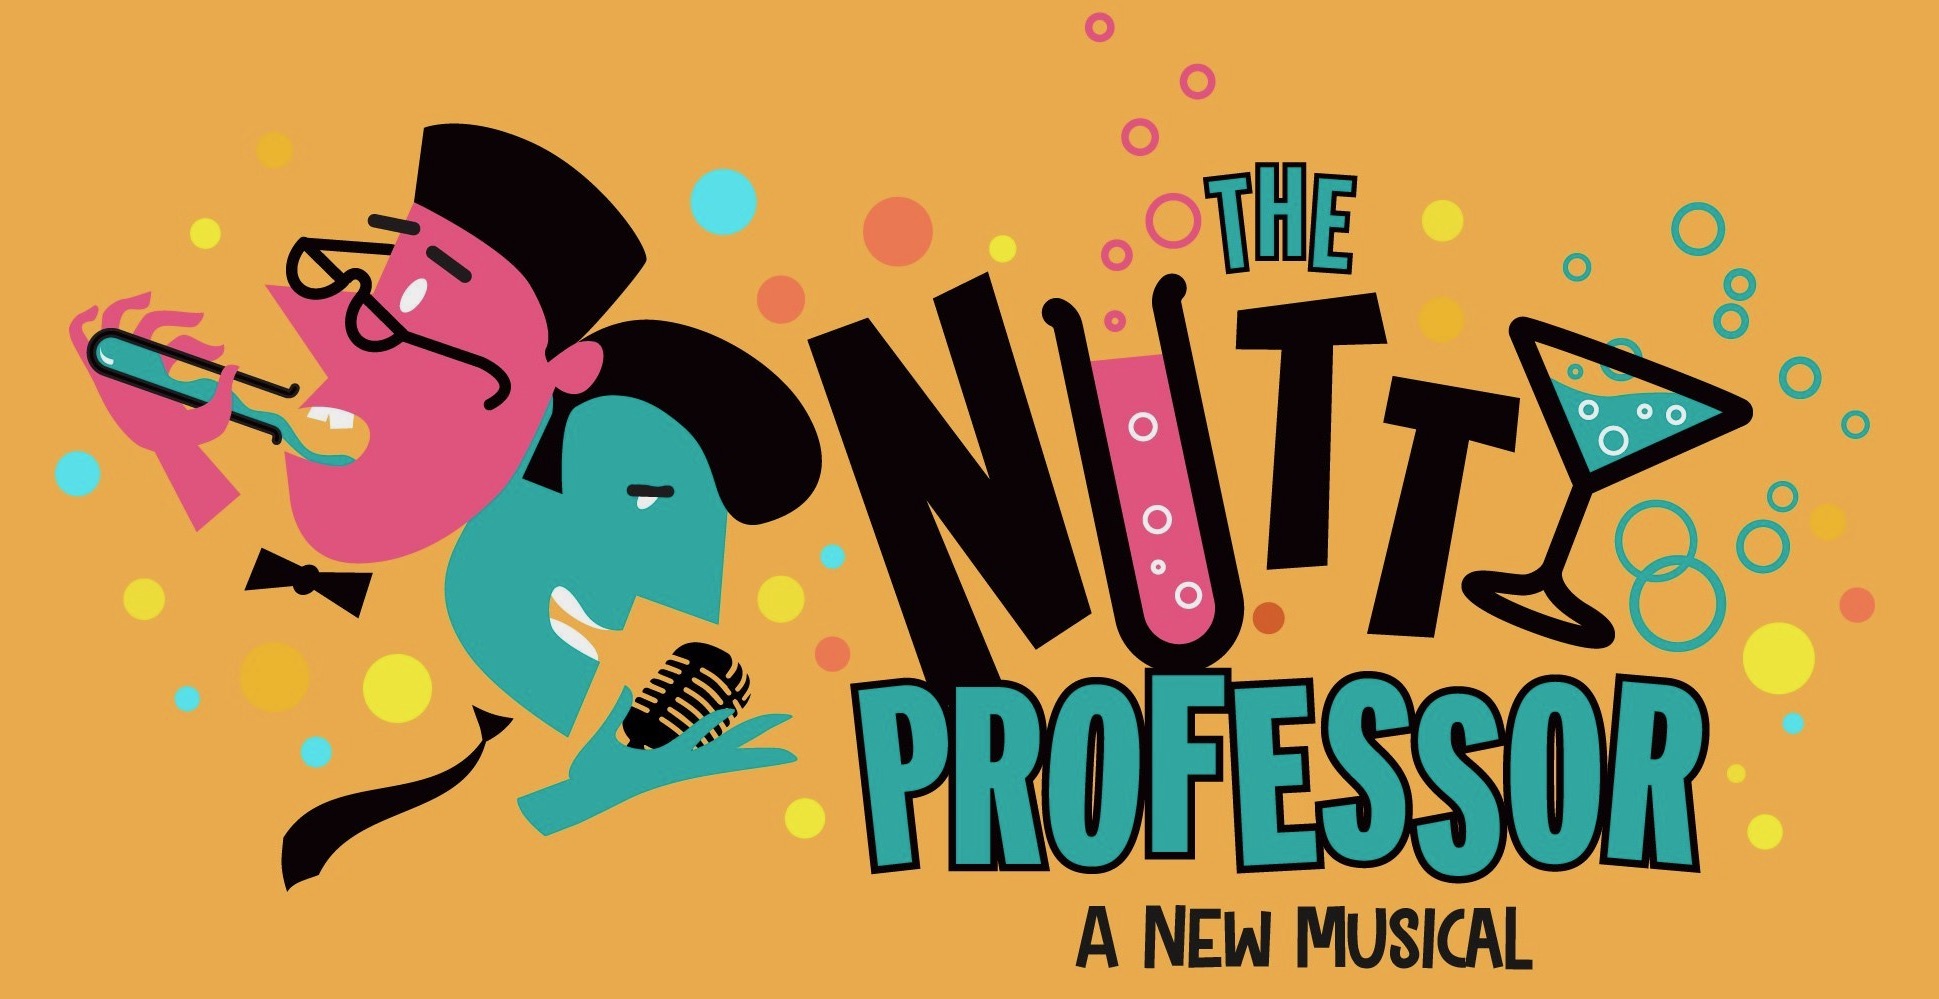 Featured image for “Marvin Hamlisch’s The Nutty Professor to Premiere at Ogunquit Playhouse”